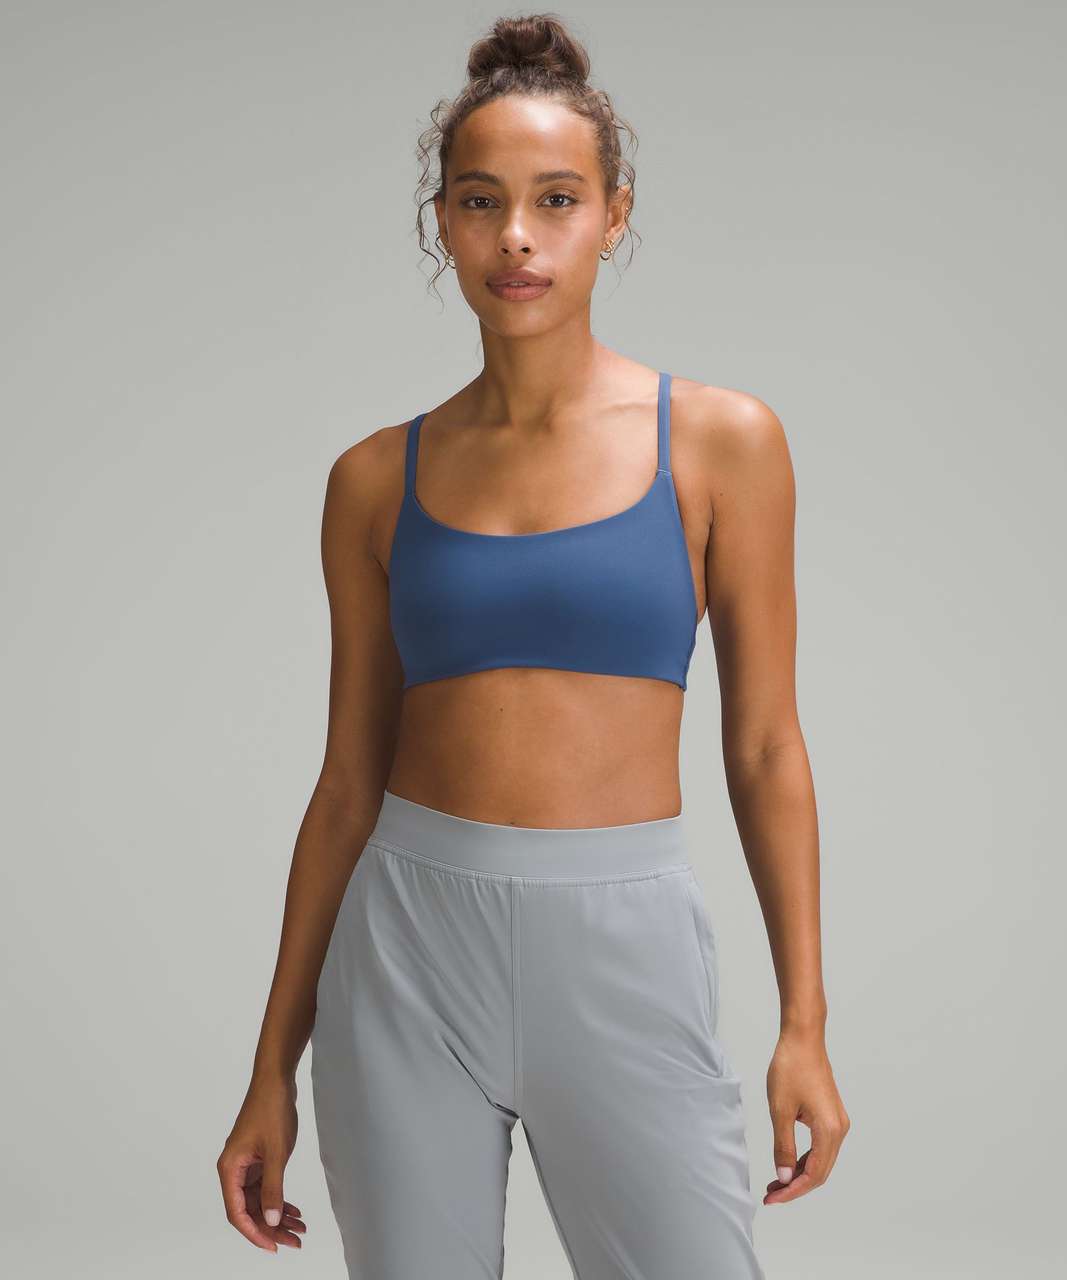 Lululemon Wunder Train Strappy Racer Bra *Light Support, A/B Cup - Pitch Blue